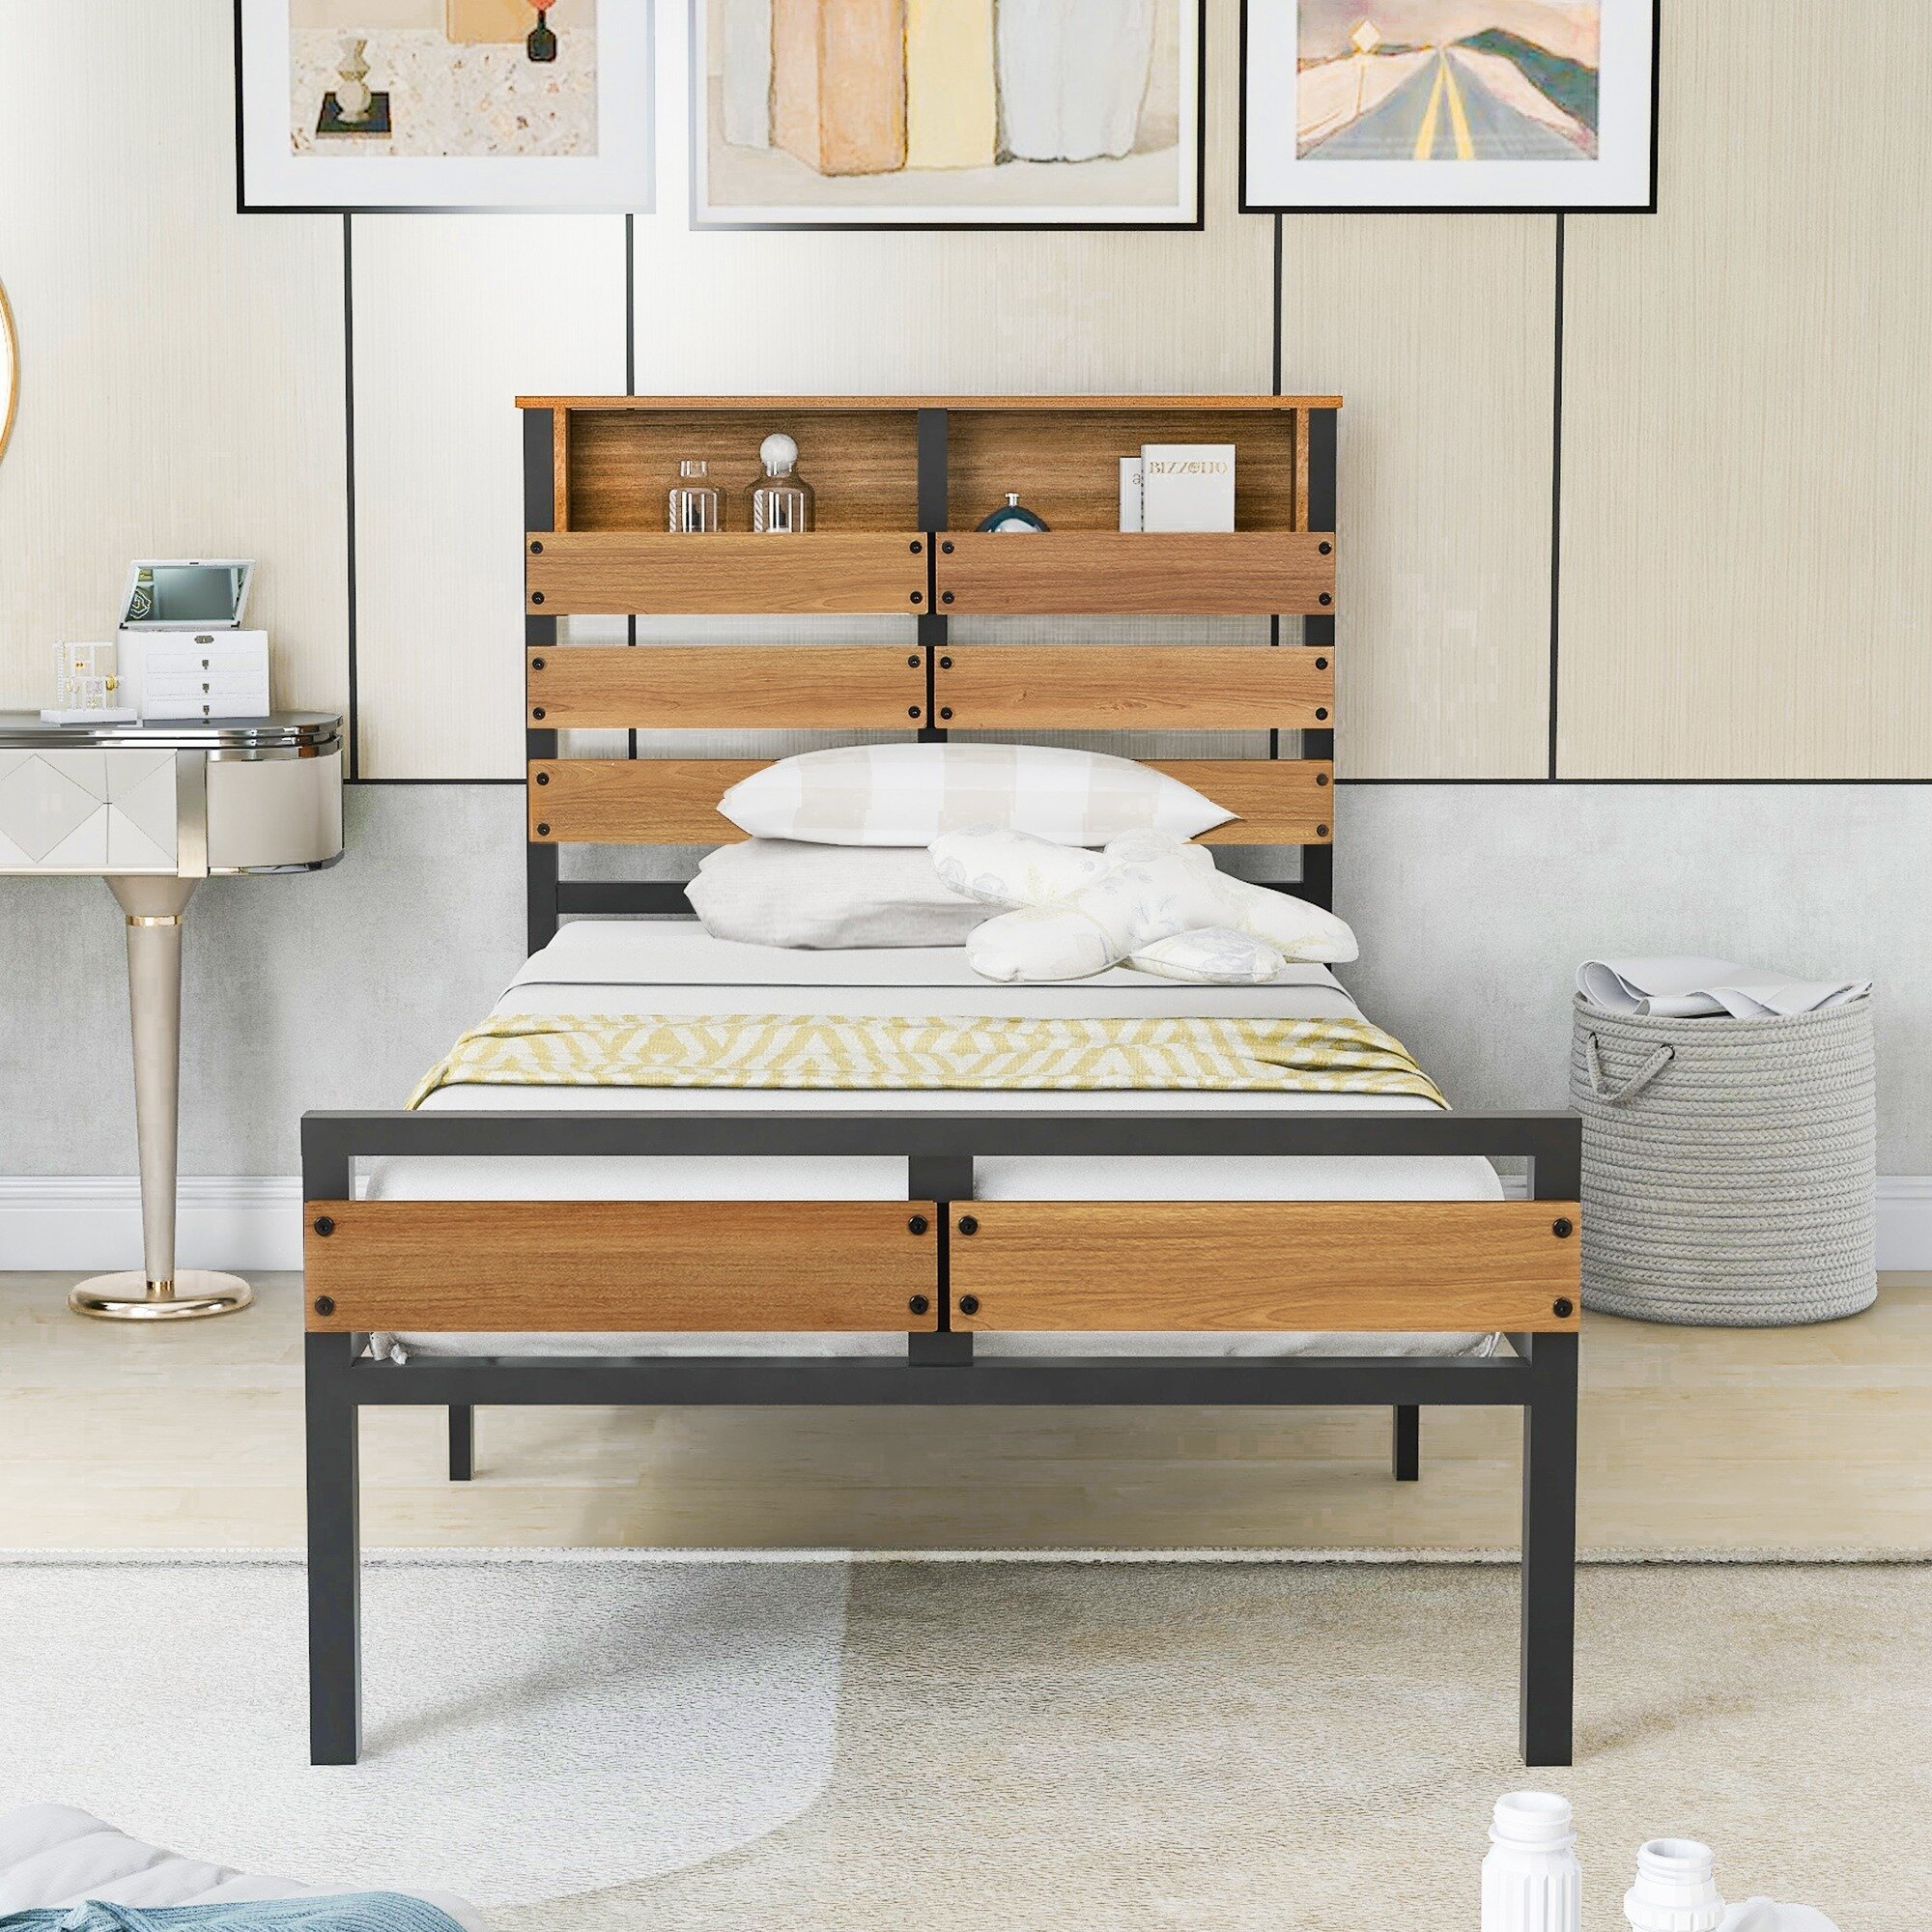 Details about   TWIN Size Metal Platform Bed Frame w/Wooden Headboard Rustic Country Style 